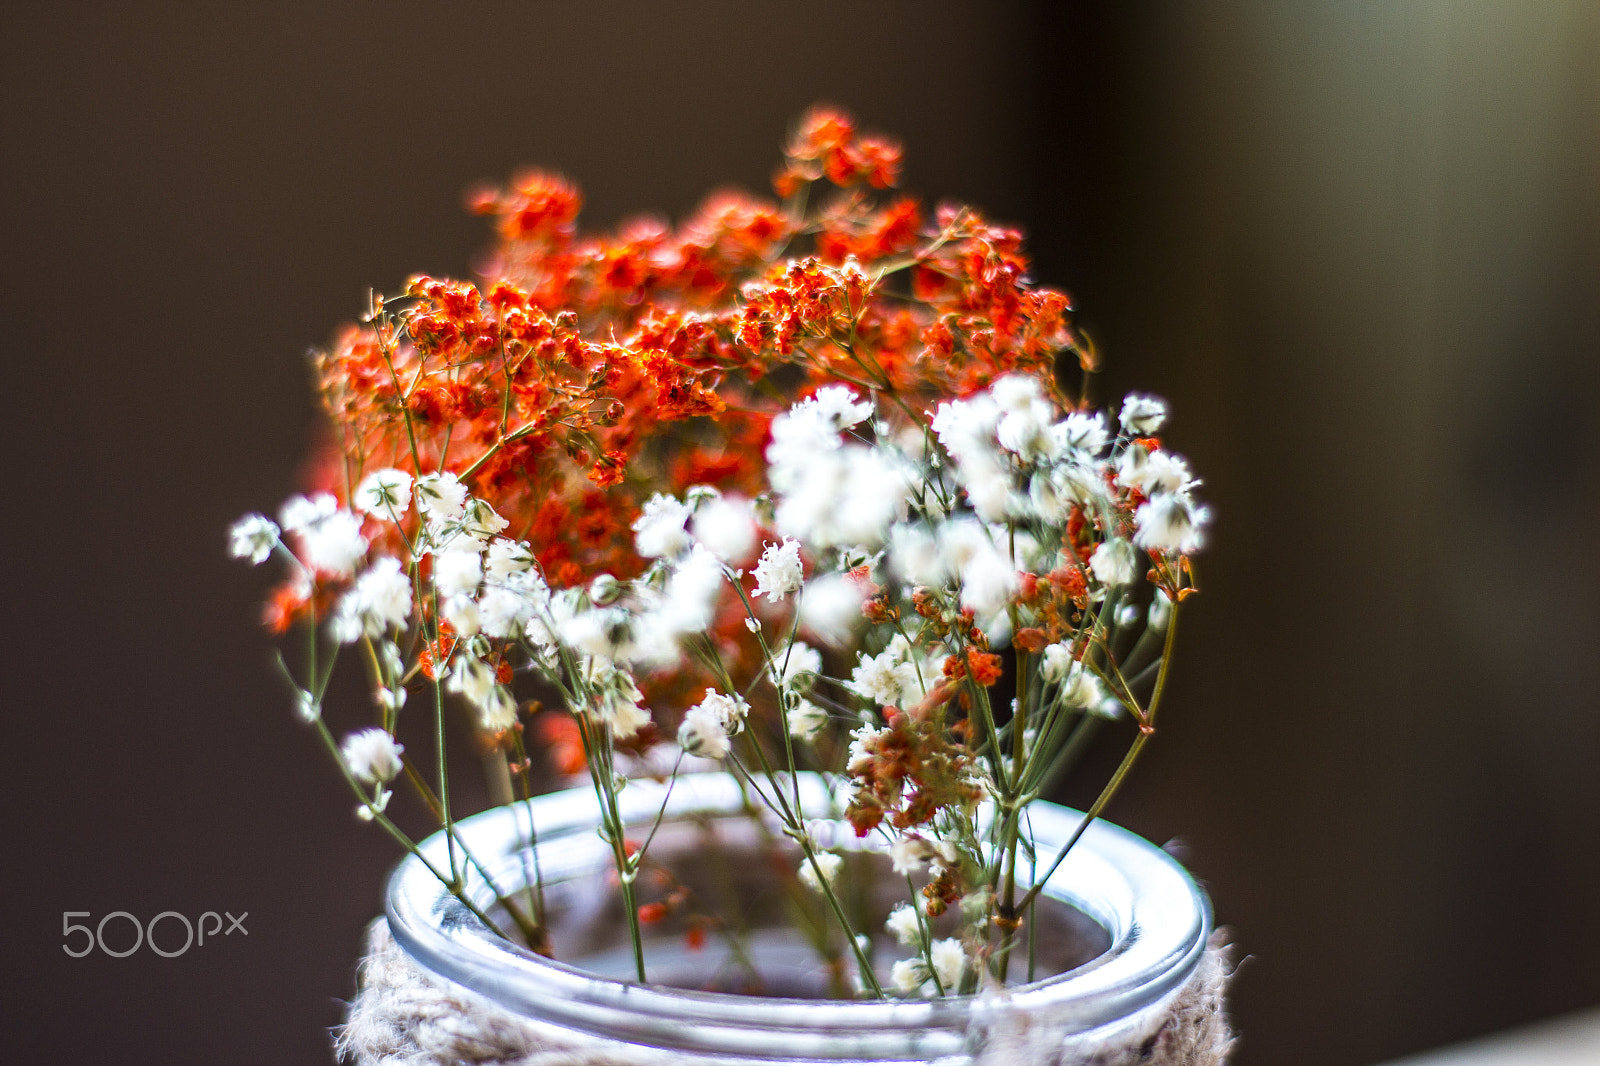 ZEISS Planar T* 50mm F1.4 sample photo. Nice and tiny flowers photography